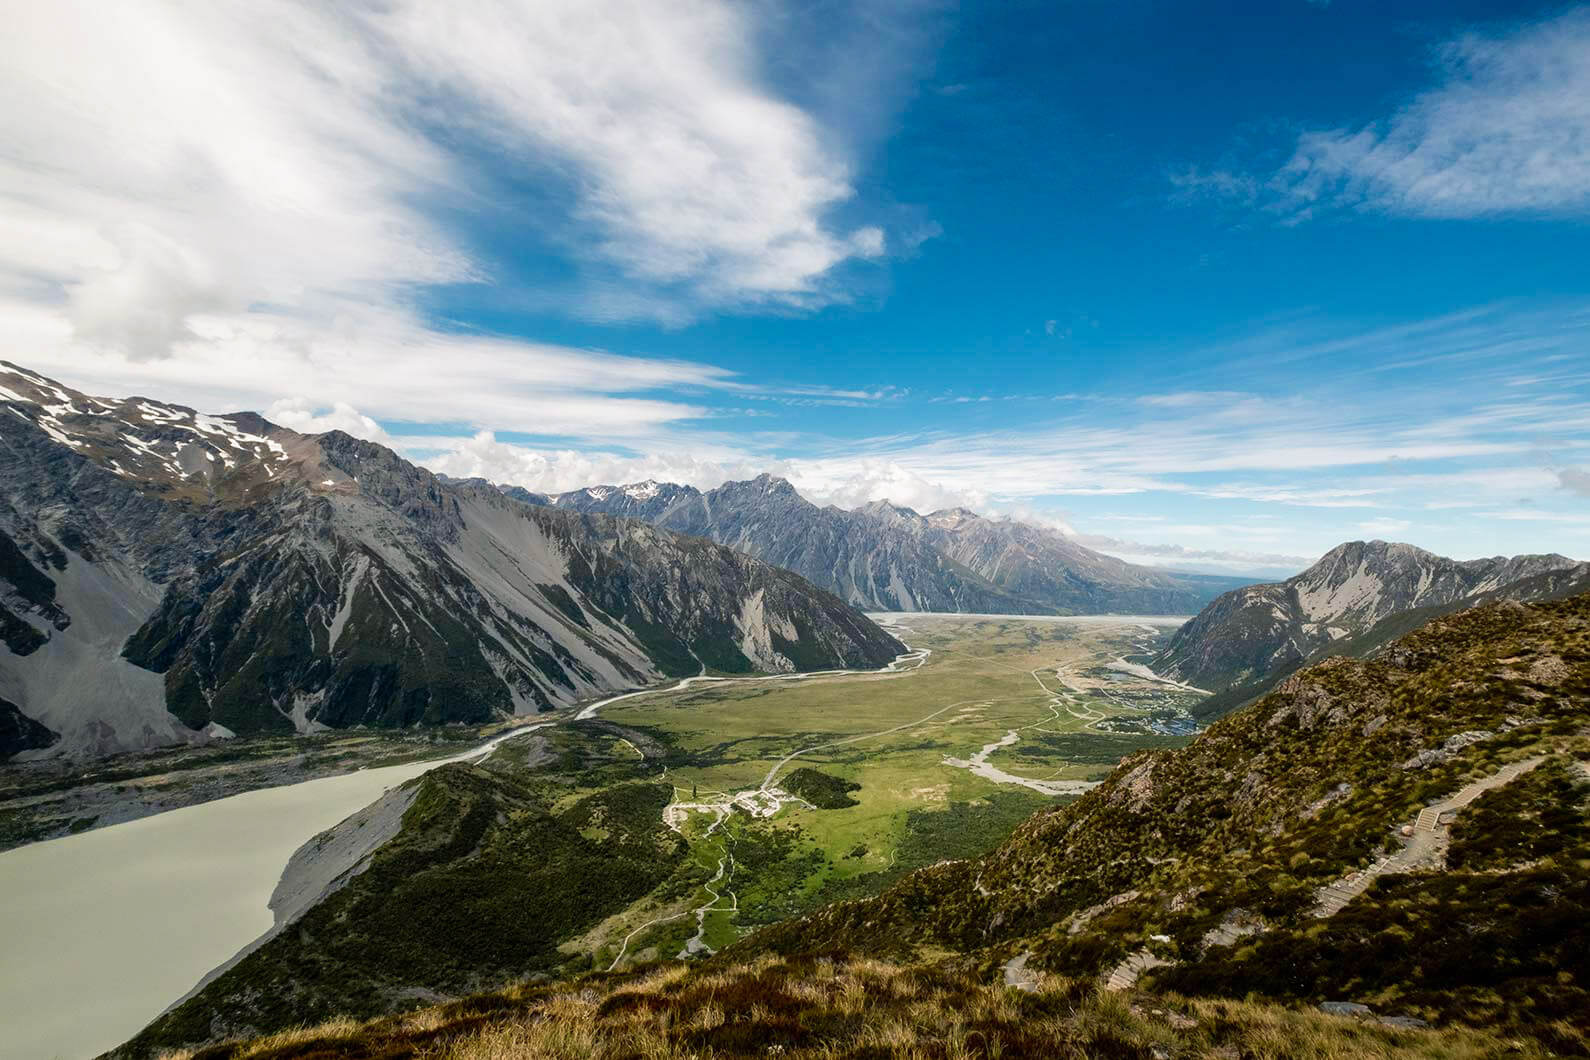 The best hikes in New Zealand